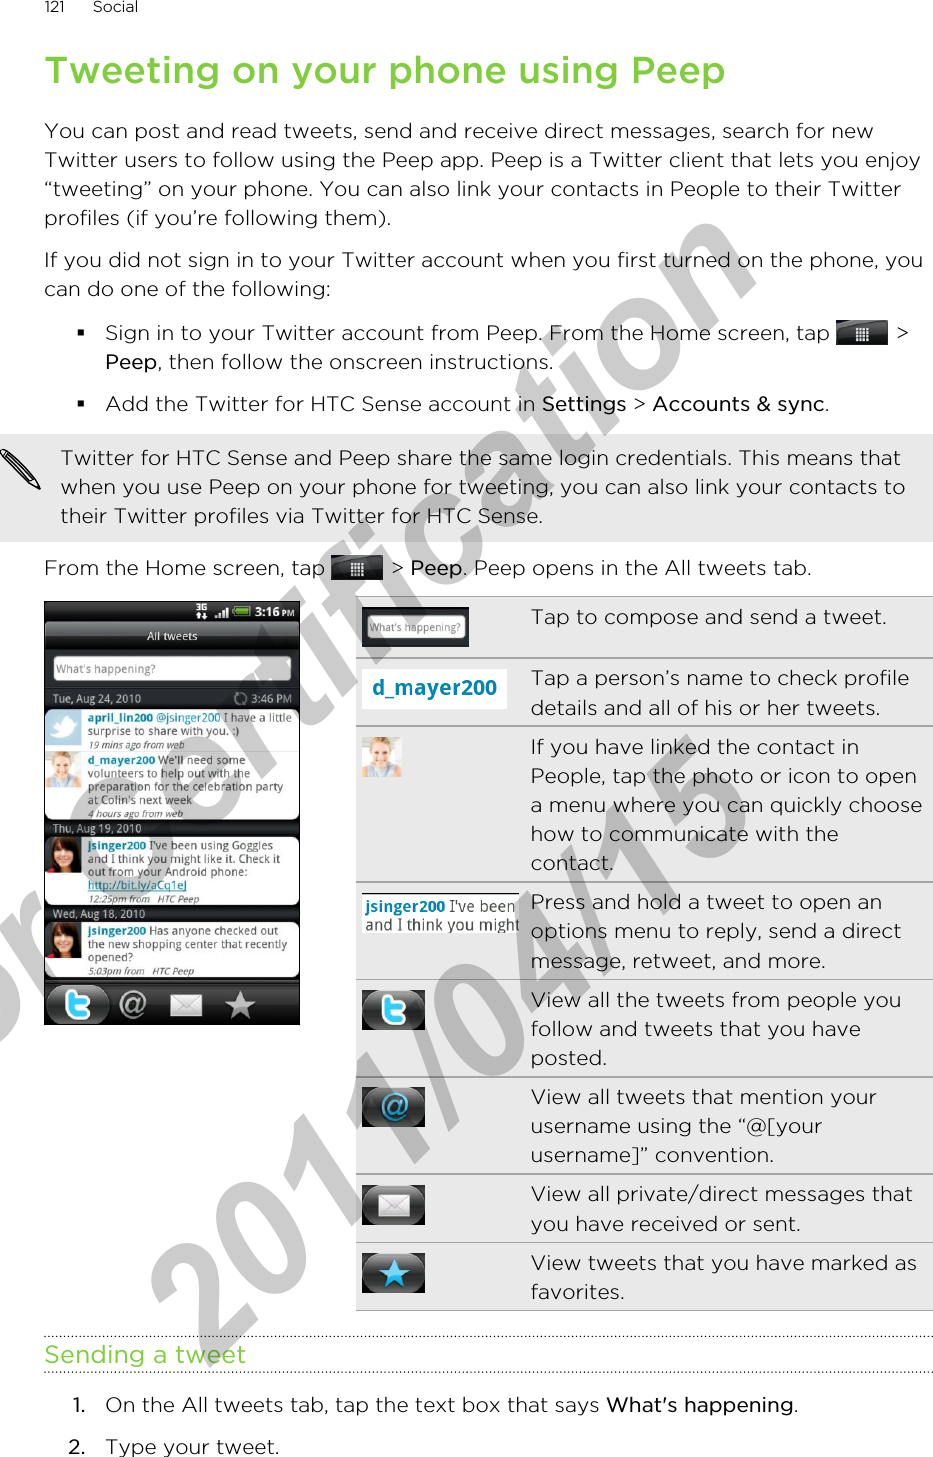 Tweeting on your phone using PeepYou can post and read tweets, send and receive direct messages, search for newTwitter users to follow using the Peep app. Peep is a Twitter client that lets you enjoy“tweeting” on your phone. You can also link your contacts in People to their Twitterprofiles (if you’re following them).If you did not sign in to your Twitter account when you first turned on the phone, youcan do one of the following:§Sign in to your Twitter account from Peep. From the Home screen, tap   &gt;Peep, then follow the onscreen instructions.§Add the Twitter for HTC Sense account in Settings &gt; Accounts &amp; sync.Twitter for HTC Sense and Peep share the same login credentials. This means thatwhen you use Peep on your phone for tweeting, you can also link your contacts totheir Twitter profiles via Twitter for HTC Sense.From the Home screen, tap   &gt; Peep. Peep opens in the All tweets tab.Tap to compose and send a tweet.Tap a person’s name to check profiledetails and all of his or her tweets.If you have linked the contact inPeople, tap the photo or icon to opena menu where you can quickly choosehow to communicate with thecontact.Press and hold a tweet to open anoptions menu to reply, send a directmessage, retweet, and more.View all the tweets from people youfollow and tweets that you haveposted.View all tweets that mention yourusername using the “@[yourusername]” convention.View all private/direct messages thatyou have received or sent.View tweets that you have marked asfavorites.Sending a tweet1. On the All tweets tab, tap the text box that says What&apos;s happening.2. Type your tweet.121 Socialfor Certification  2011/04/15